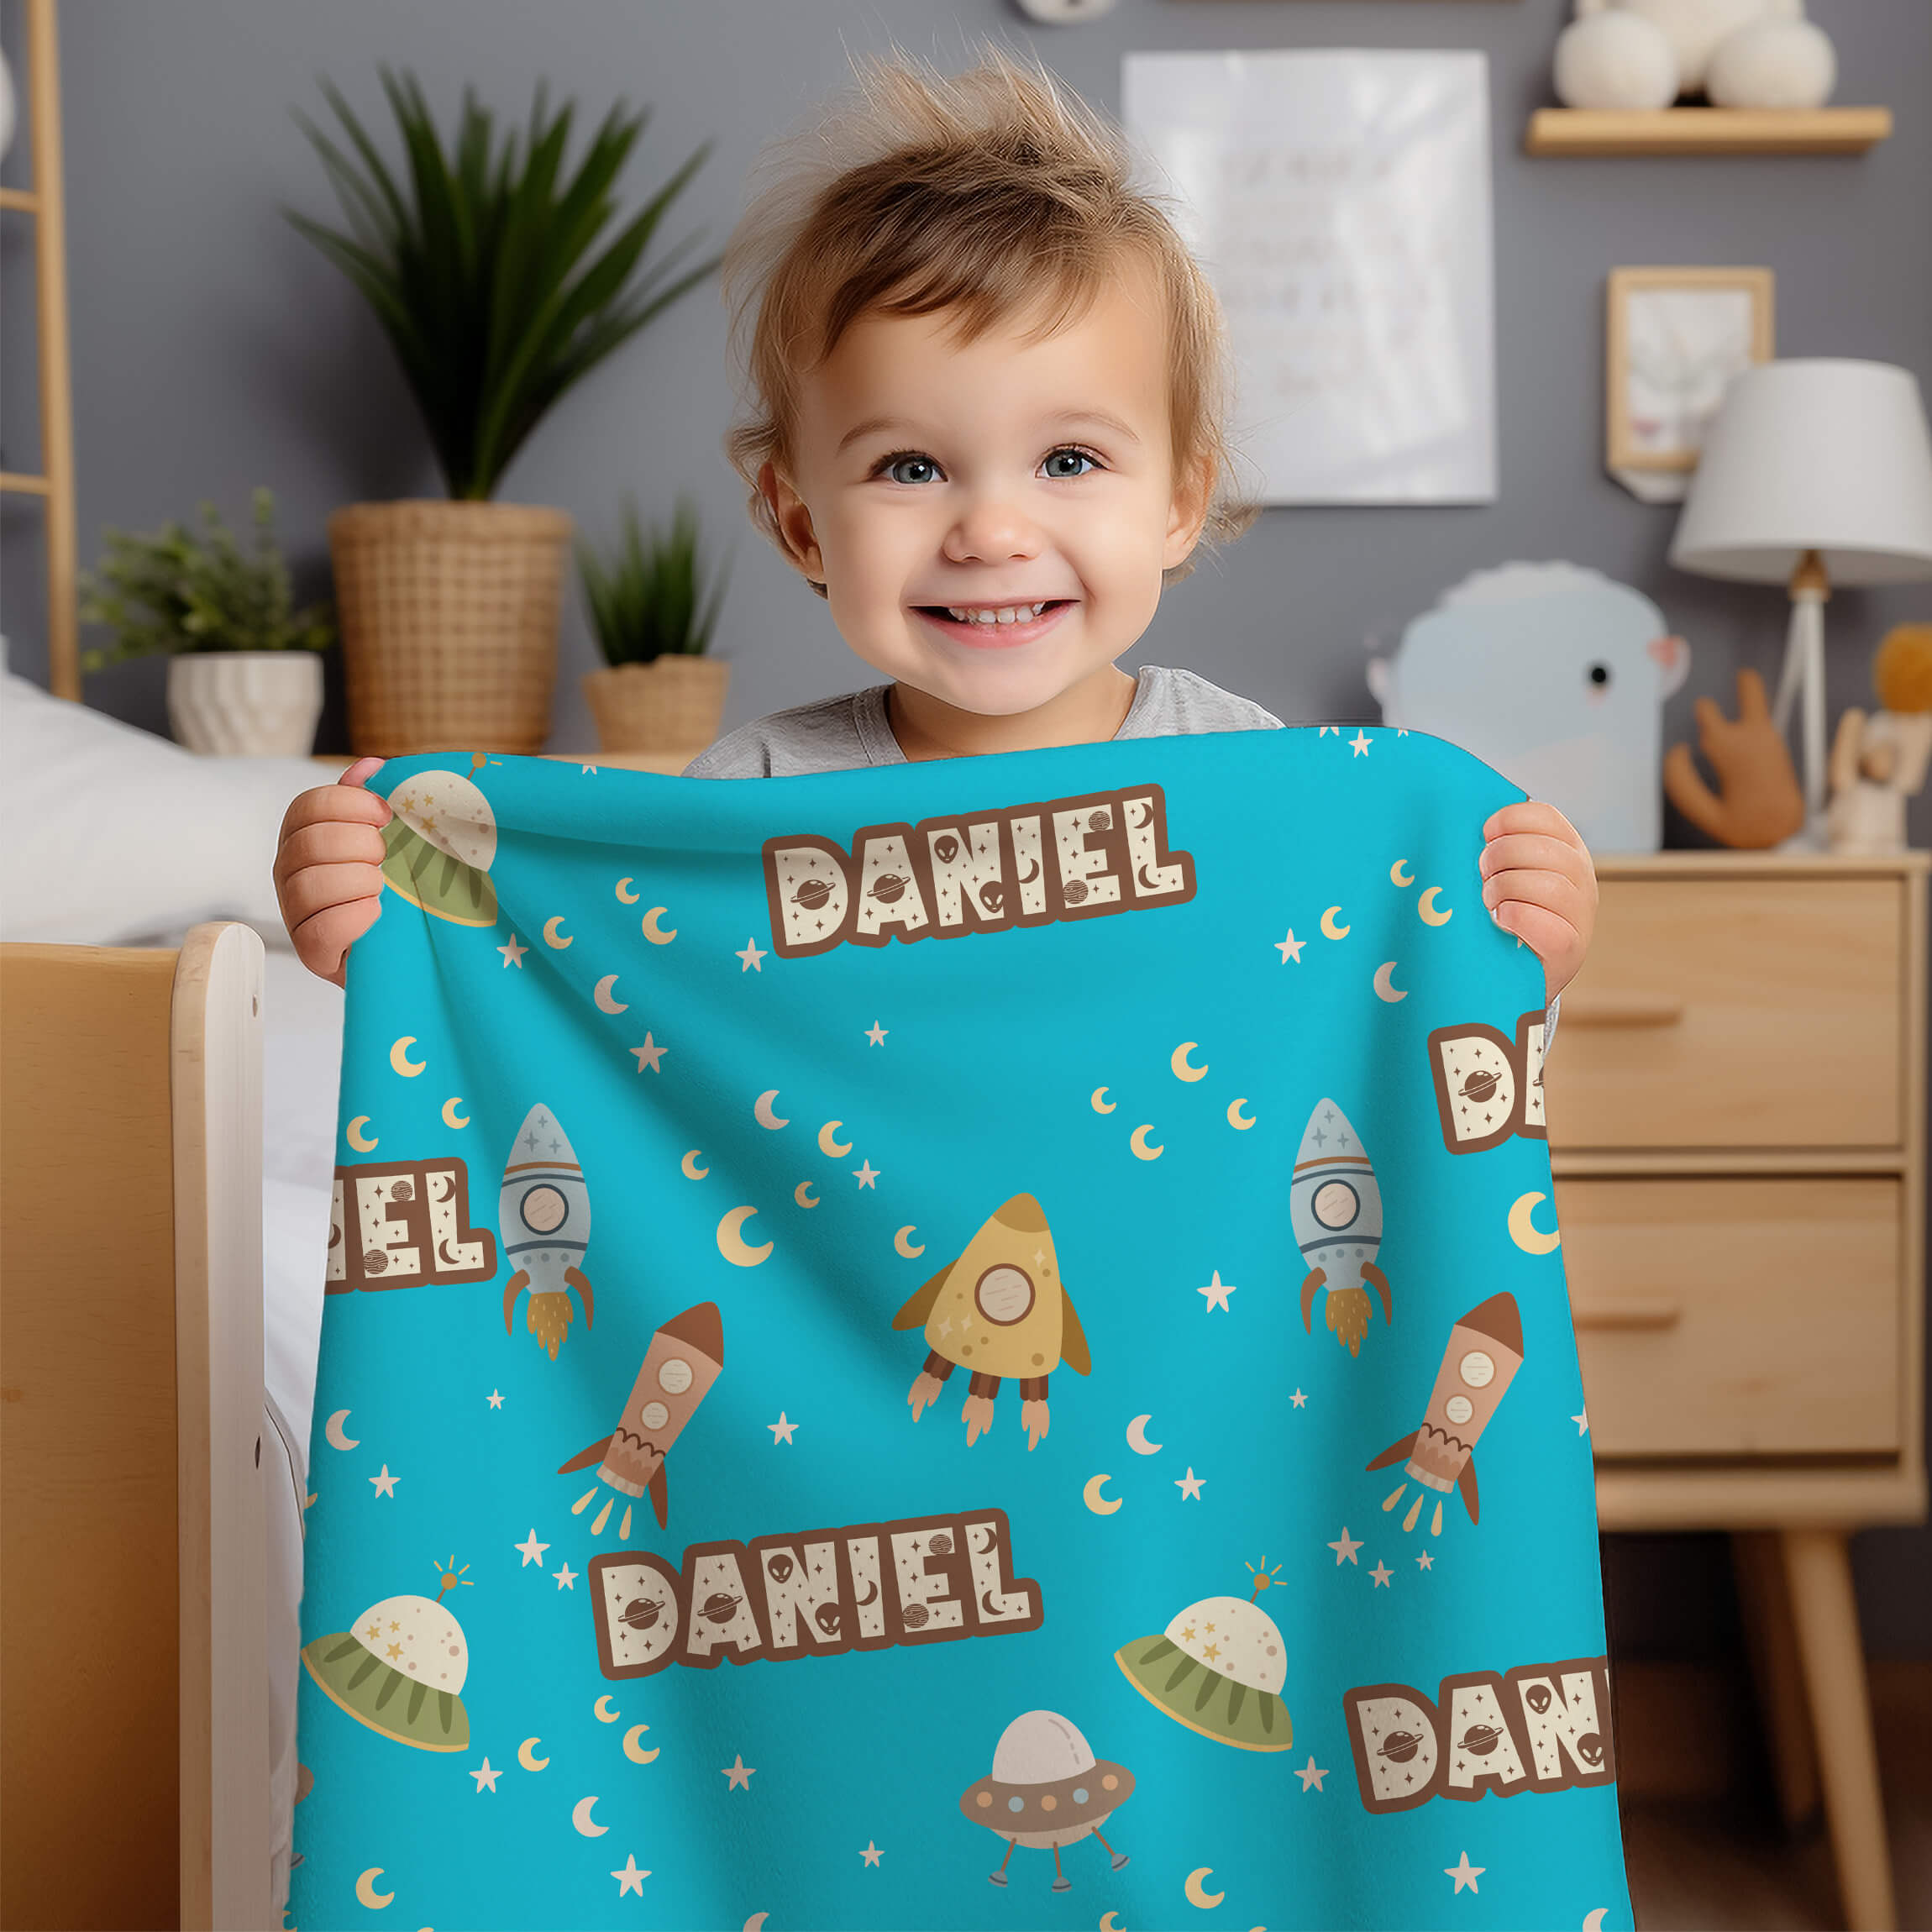 Personalized Name Blanket - Rockets